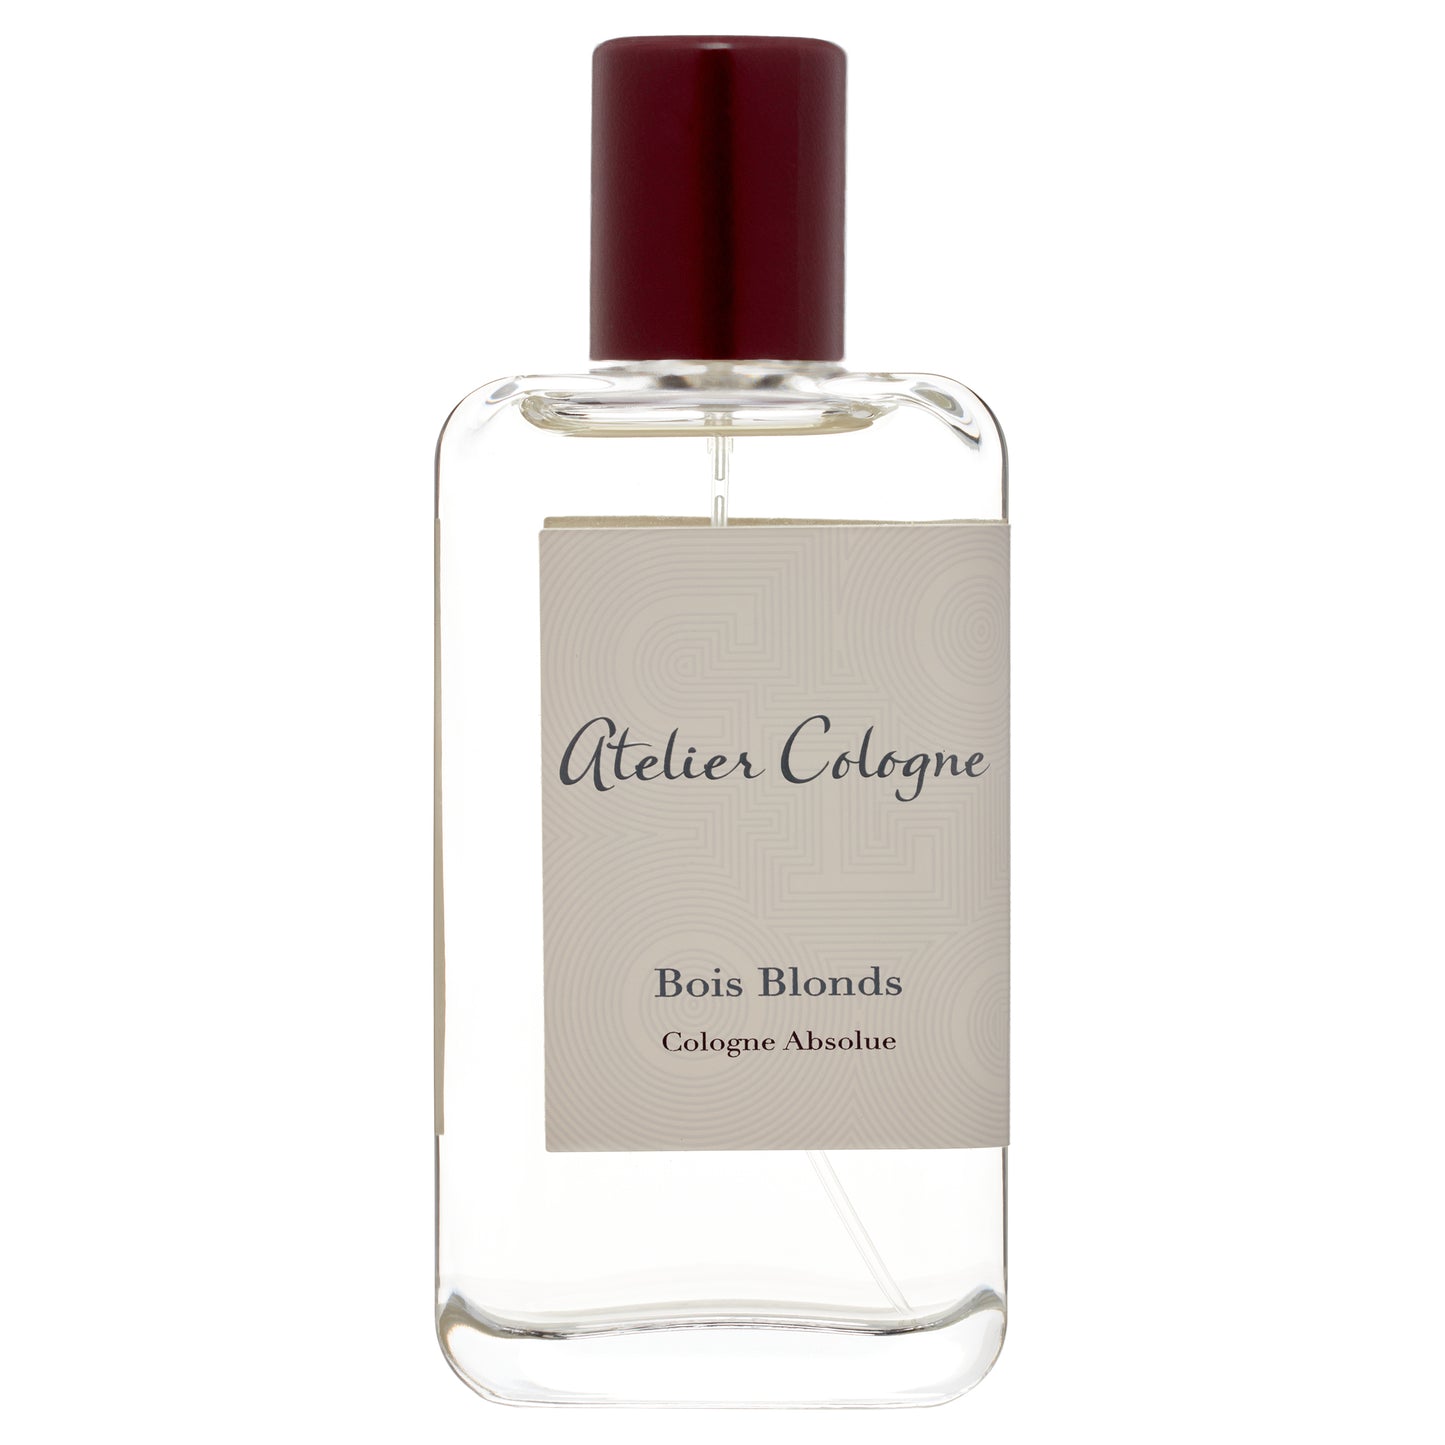 Atelier Cologne Bois Blonds Cologne Absolue Spray